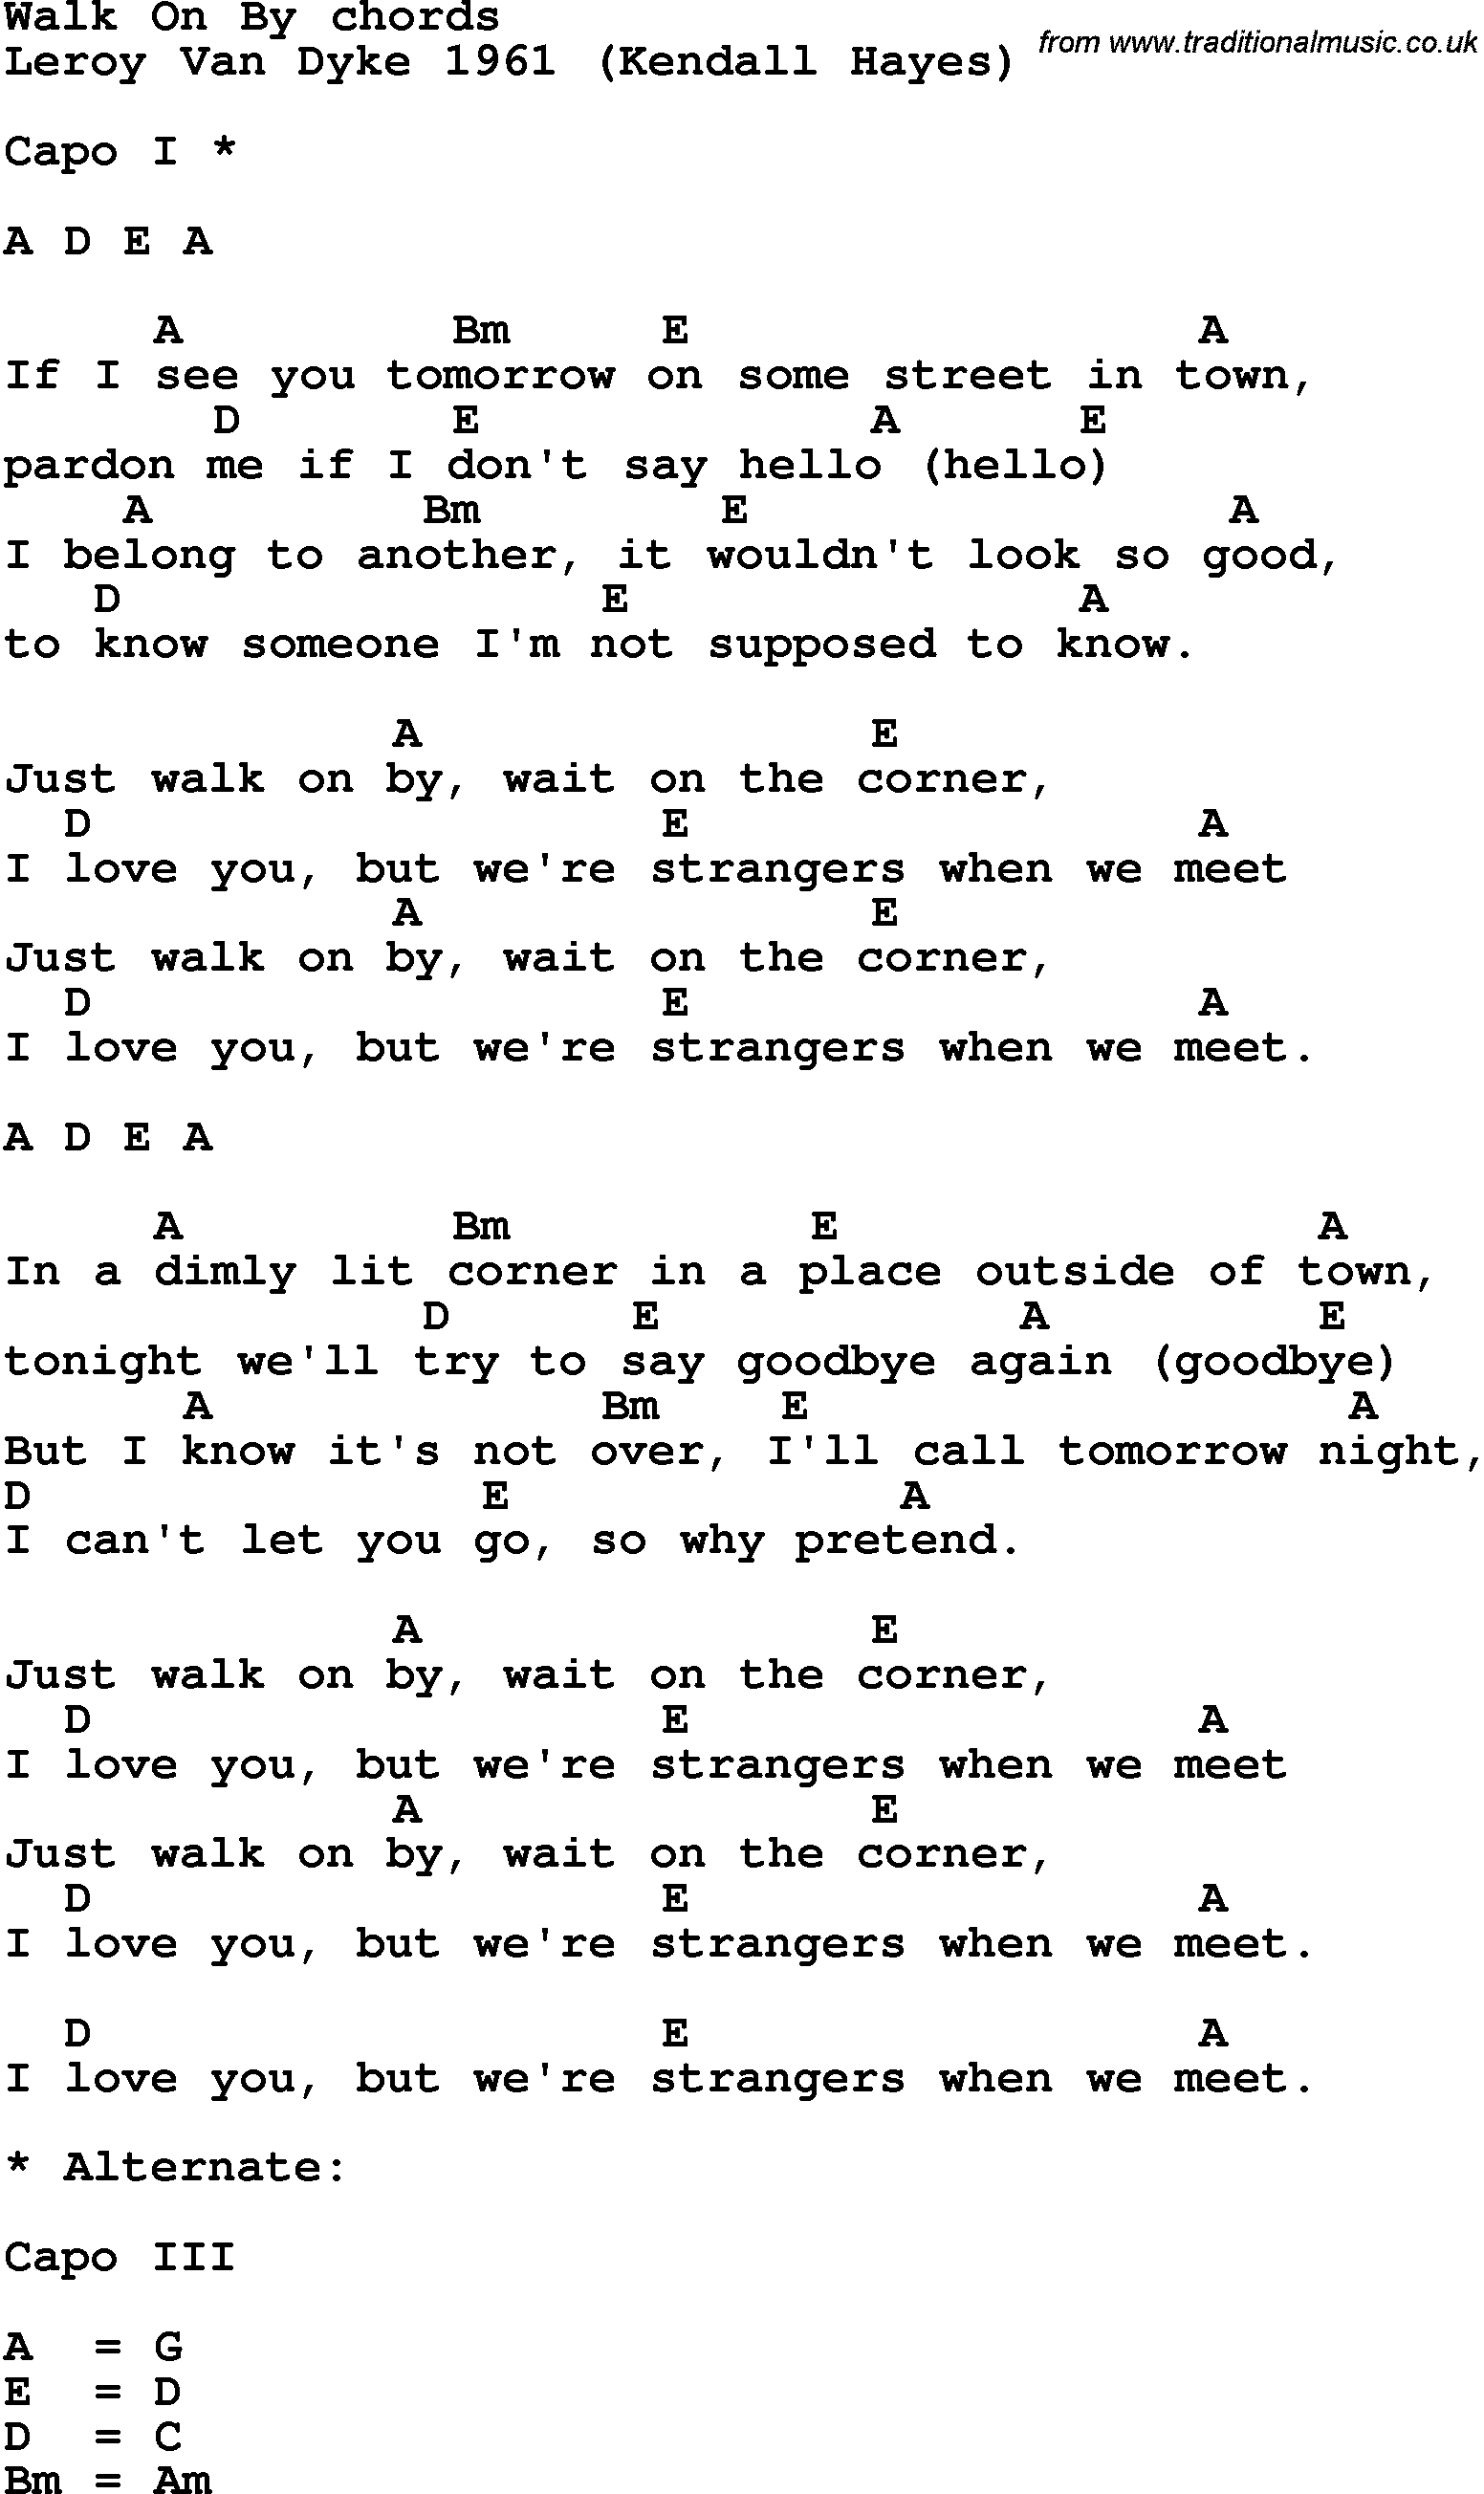 Song Lyrics with guitar chords for Walk On By